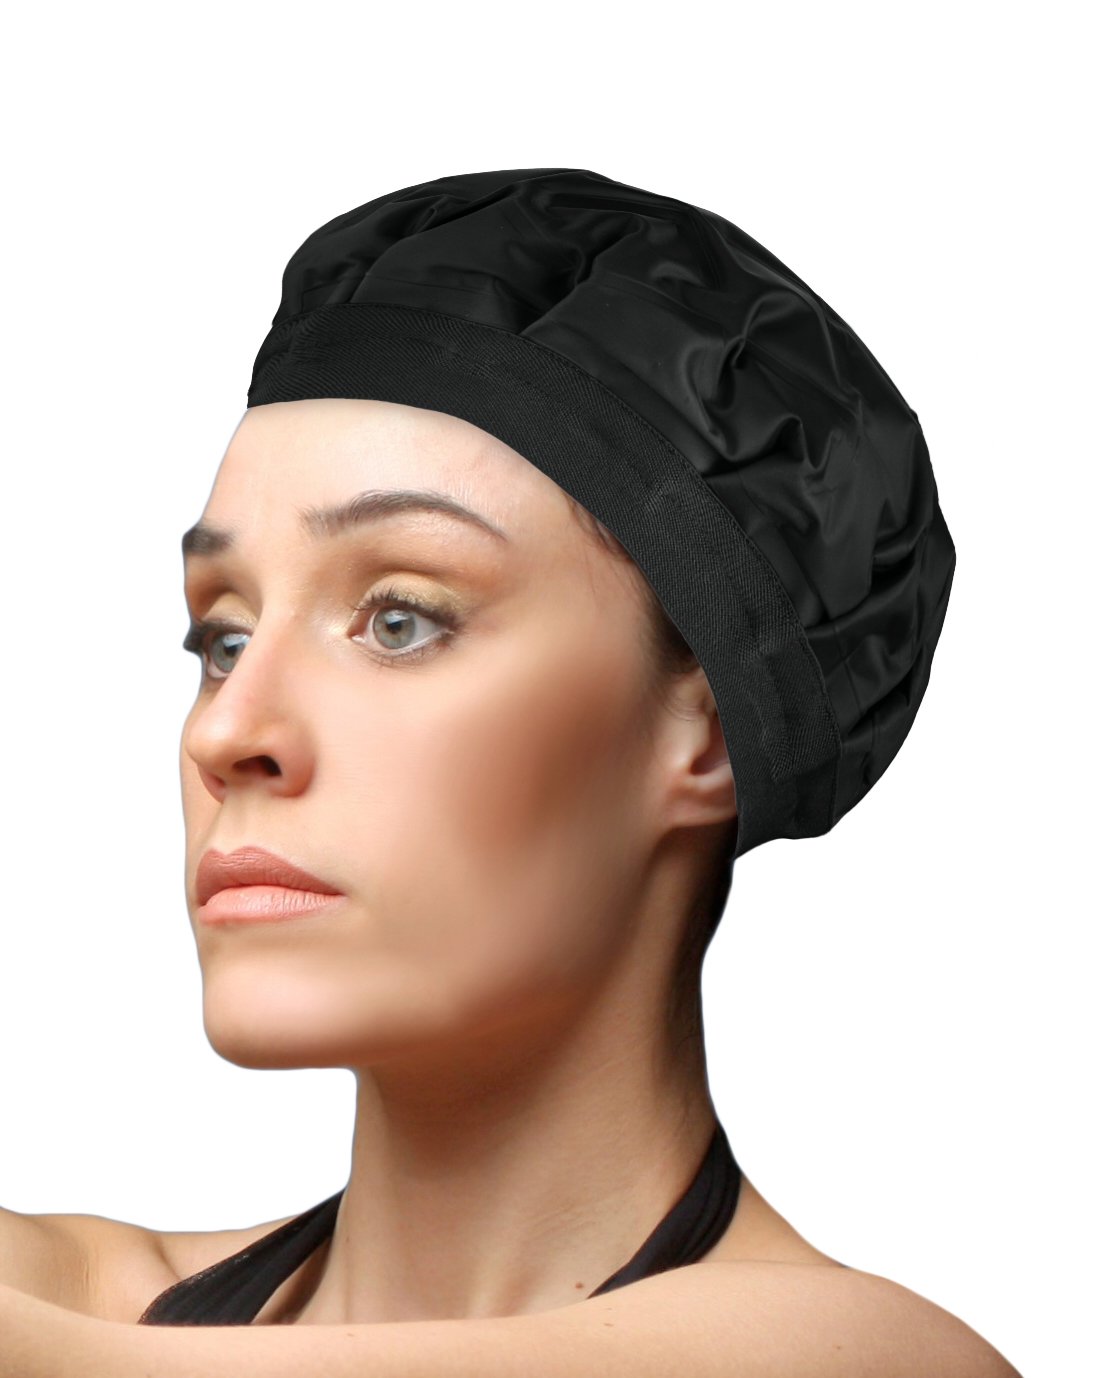 Cordless Deep Conditioning Heat Cap - Hair Styling and Treatment Steam Cap | Heat Therapy and Thermal Spa Hair Steamer Gel Cap - Black … (Standard)